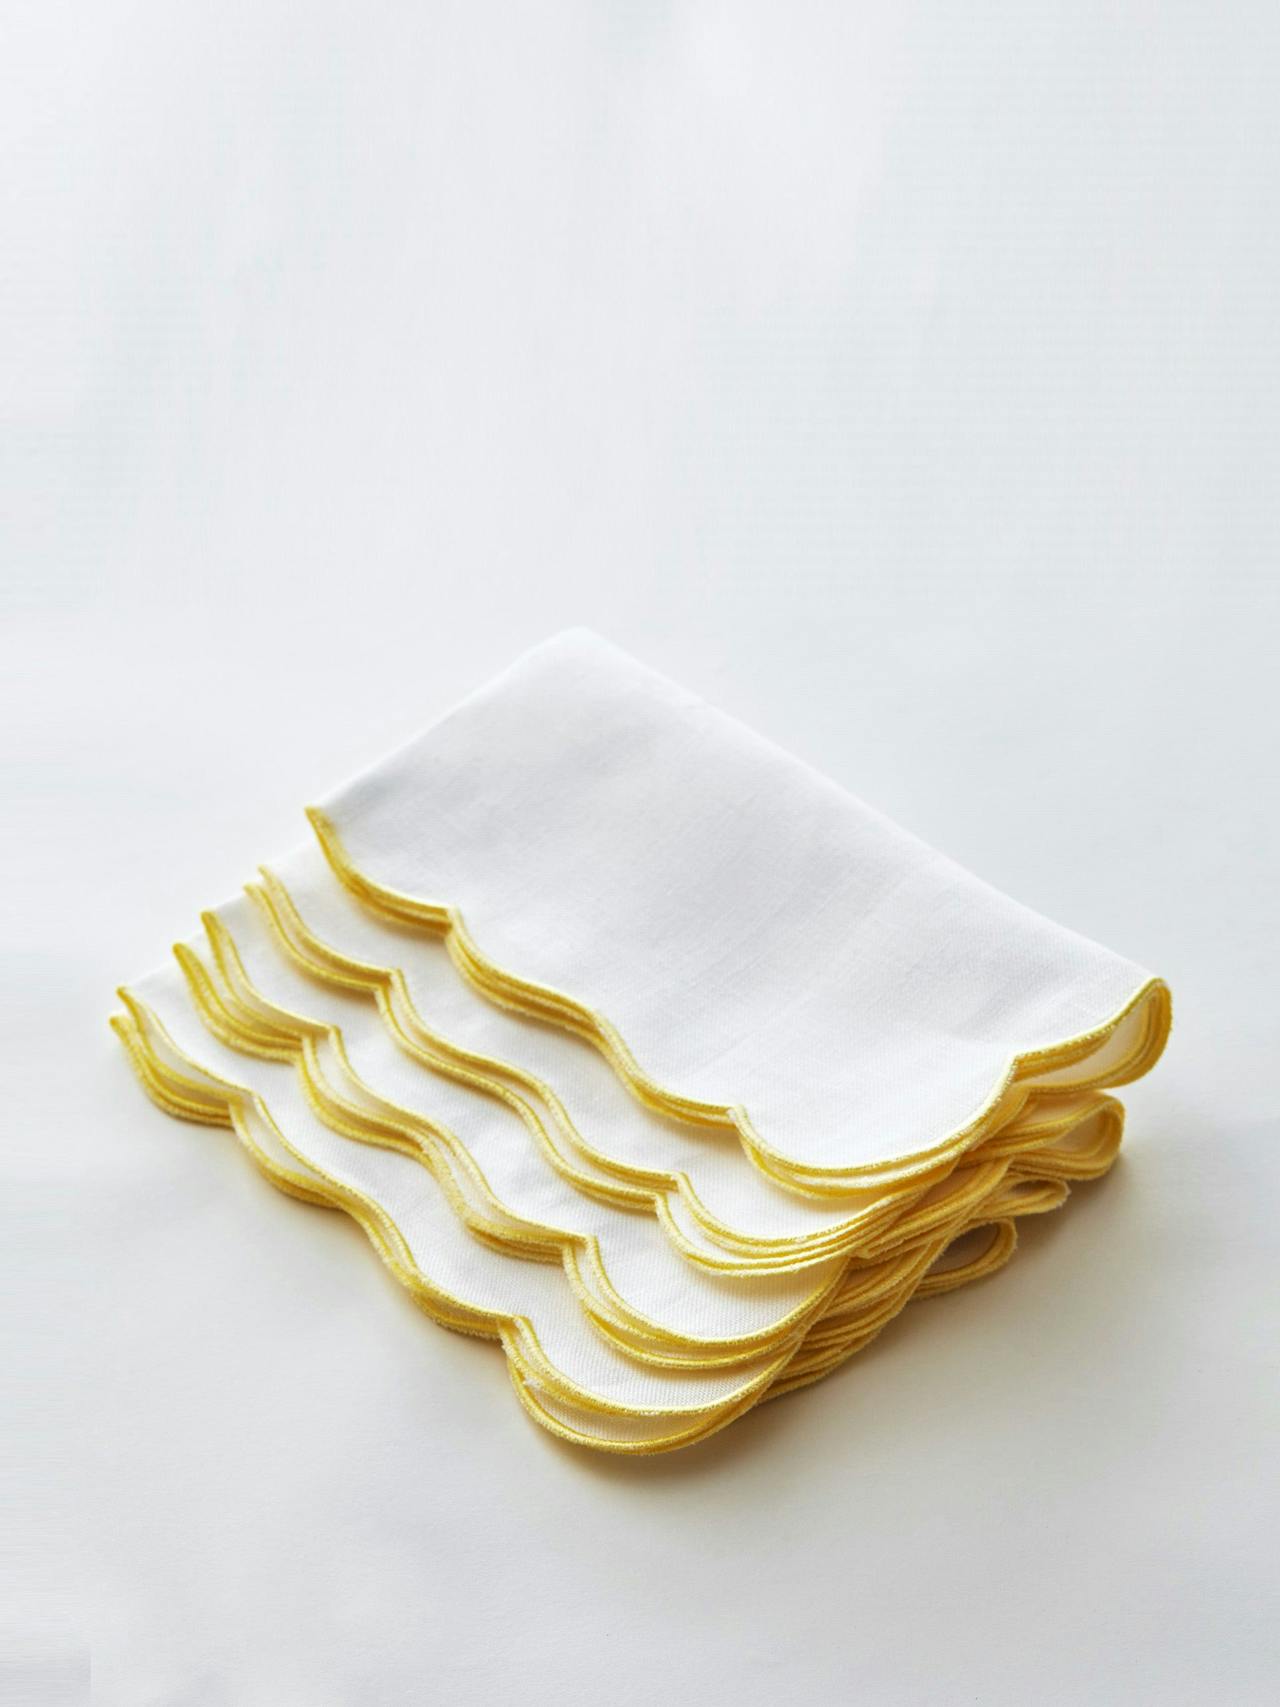 Embroidered yellow scallop napkins, set of 4